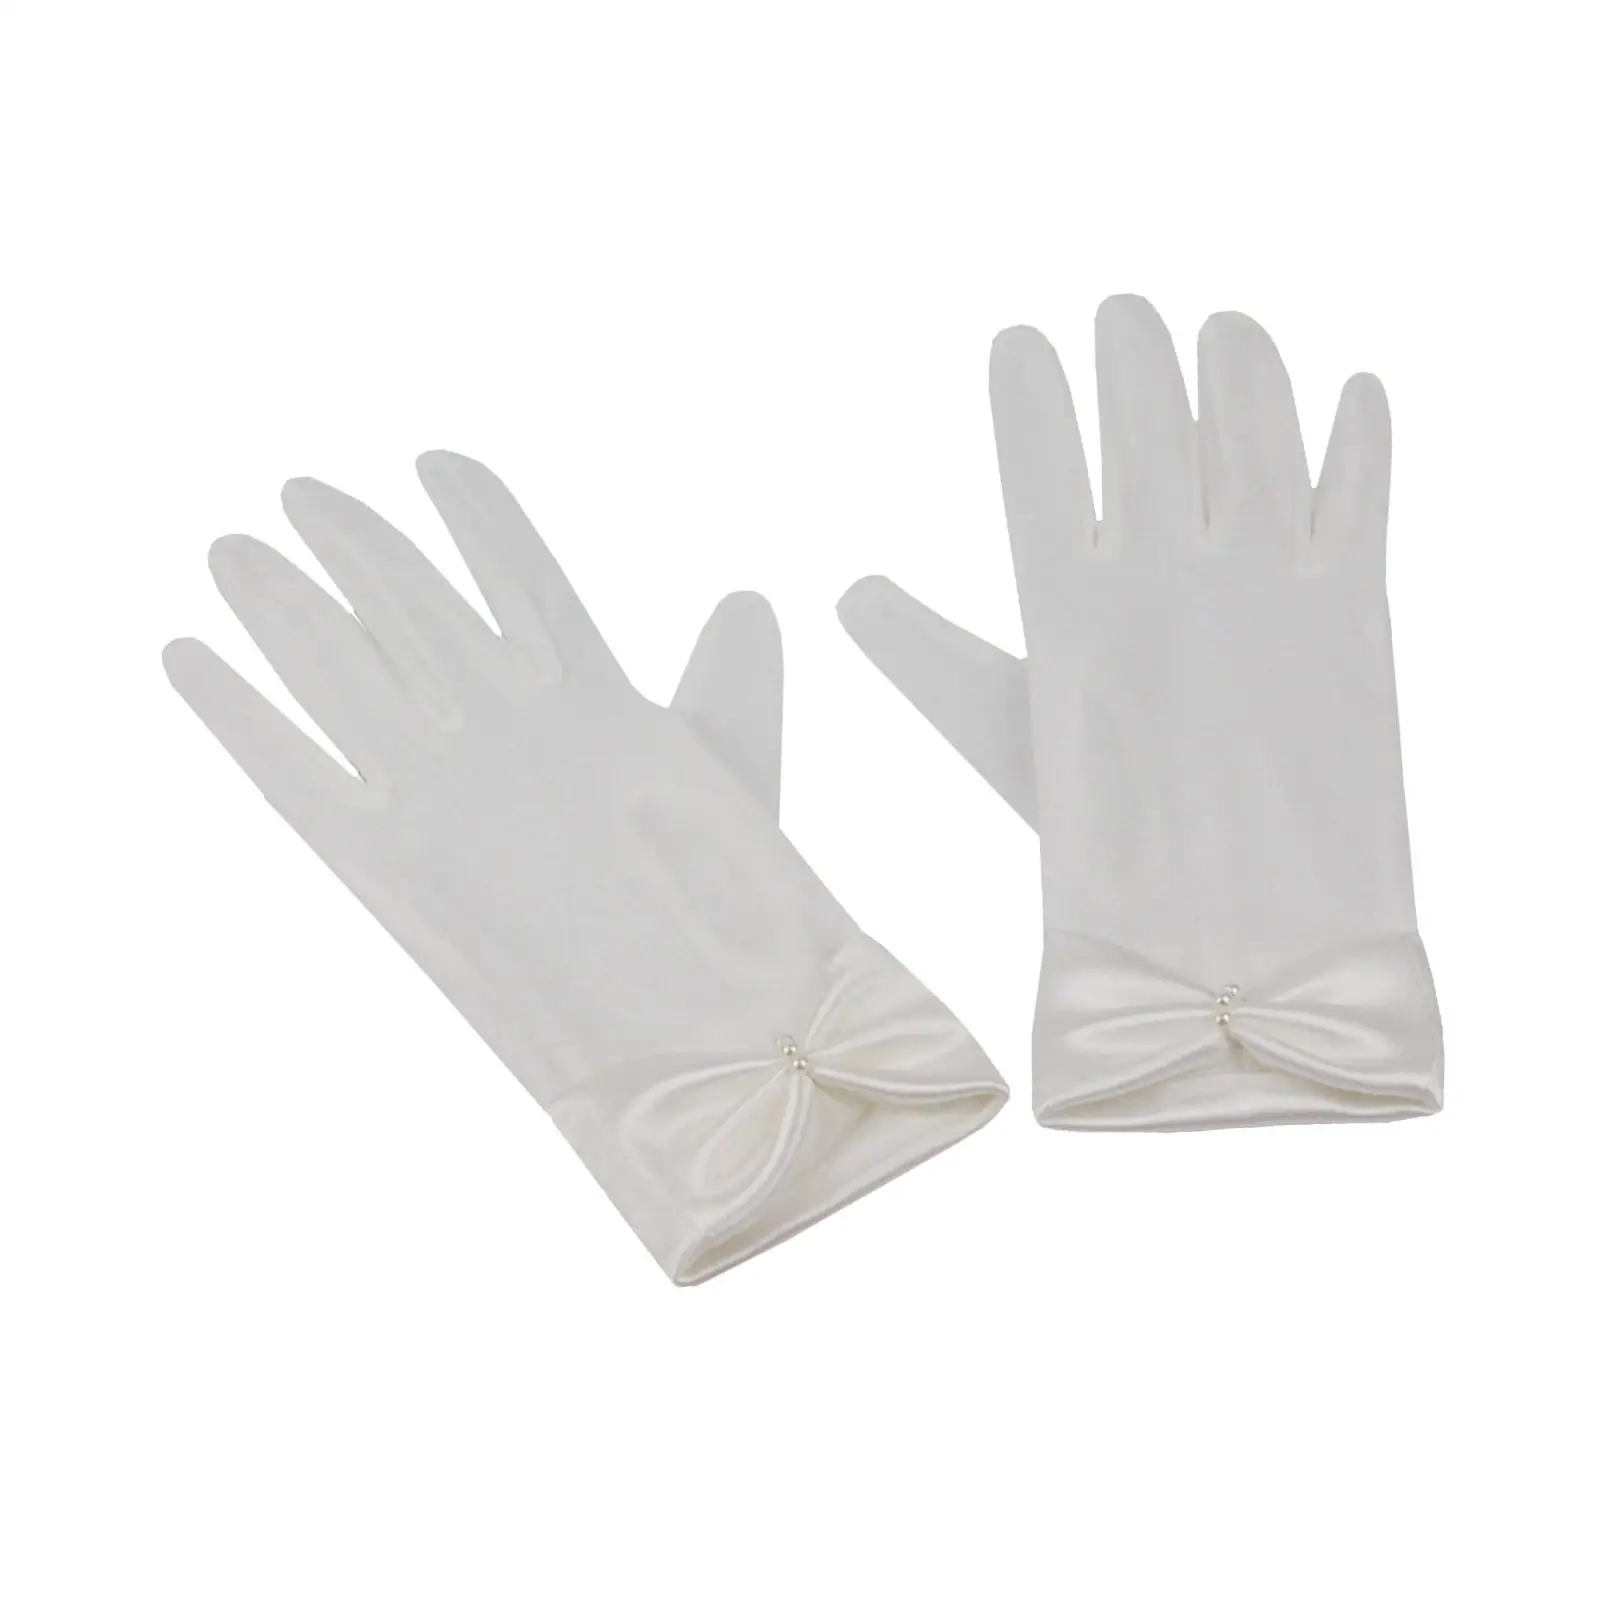 Wrist Length Gloves Party Gloves Props Costume Accessories 2 Pieces Short Gloves for